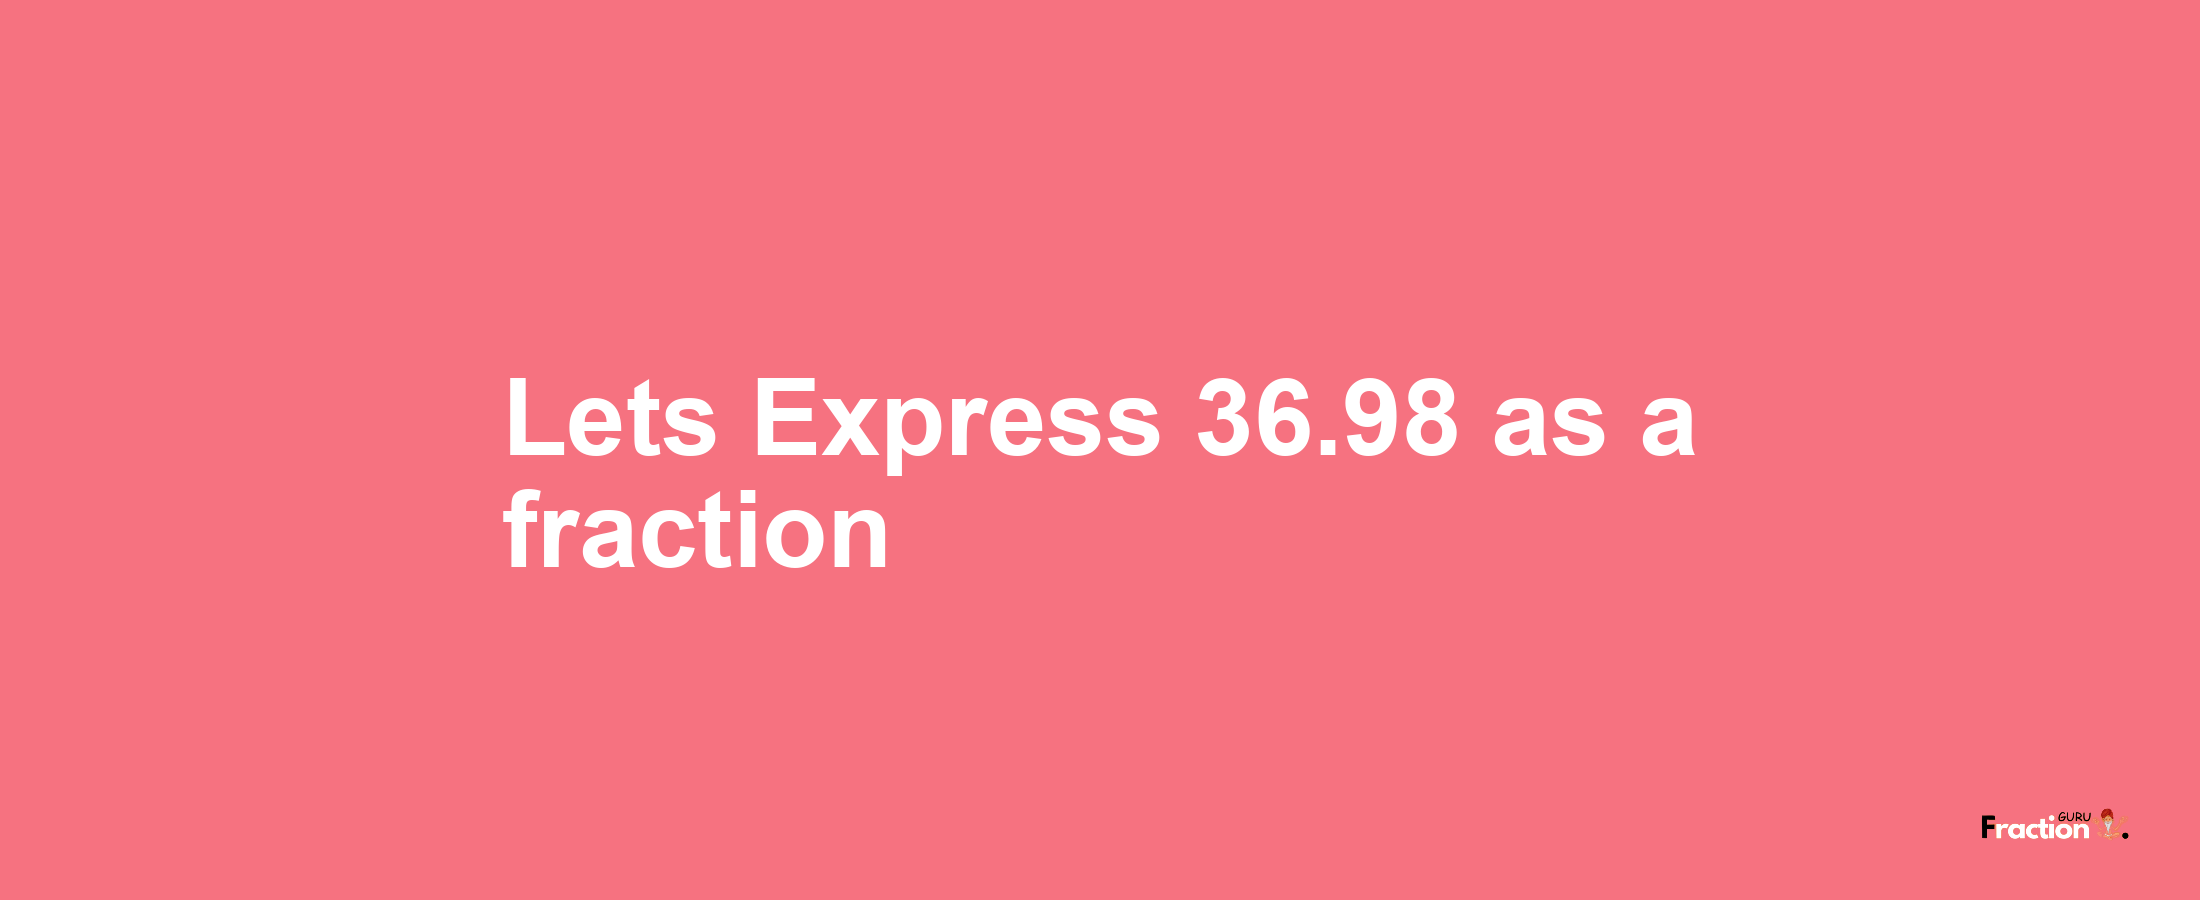 Lets Express 36.98 as afraction